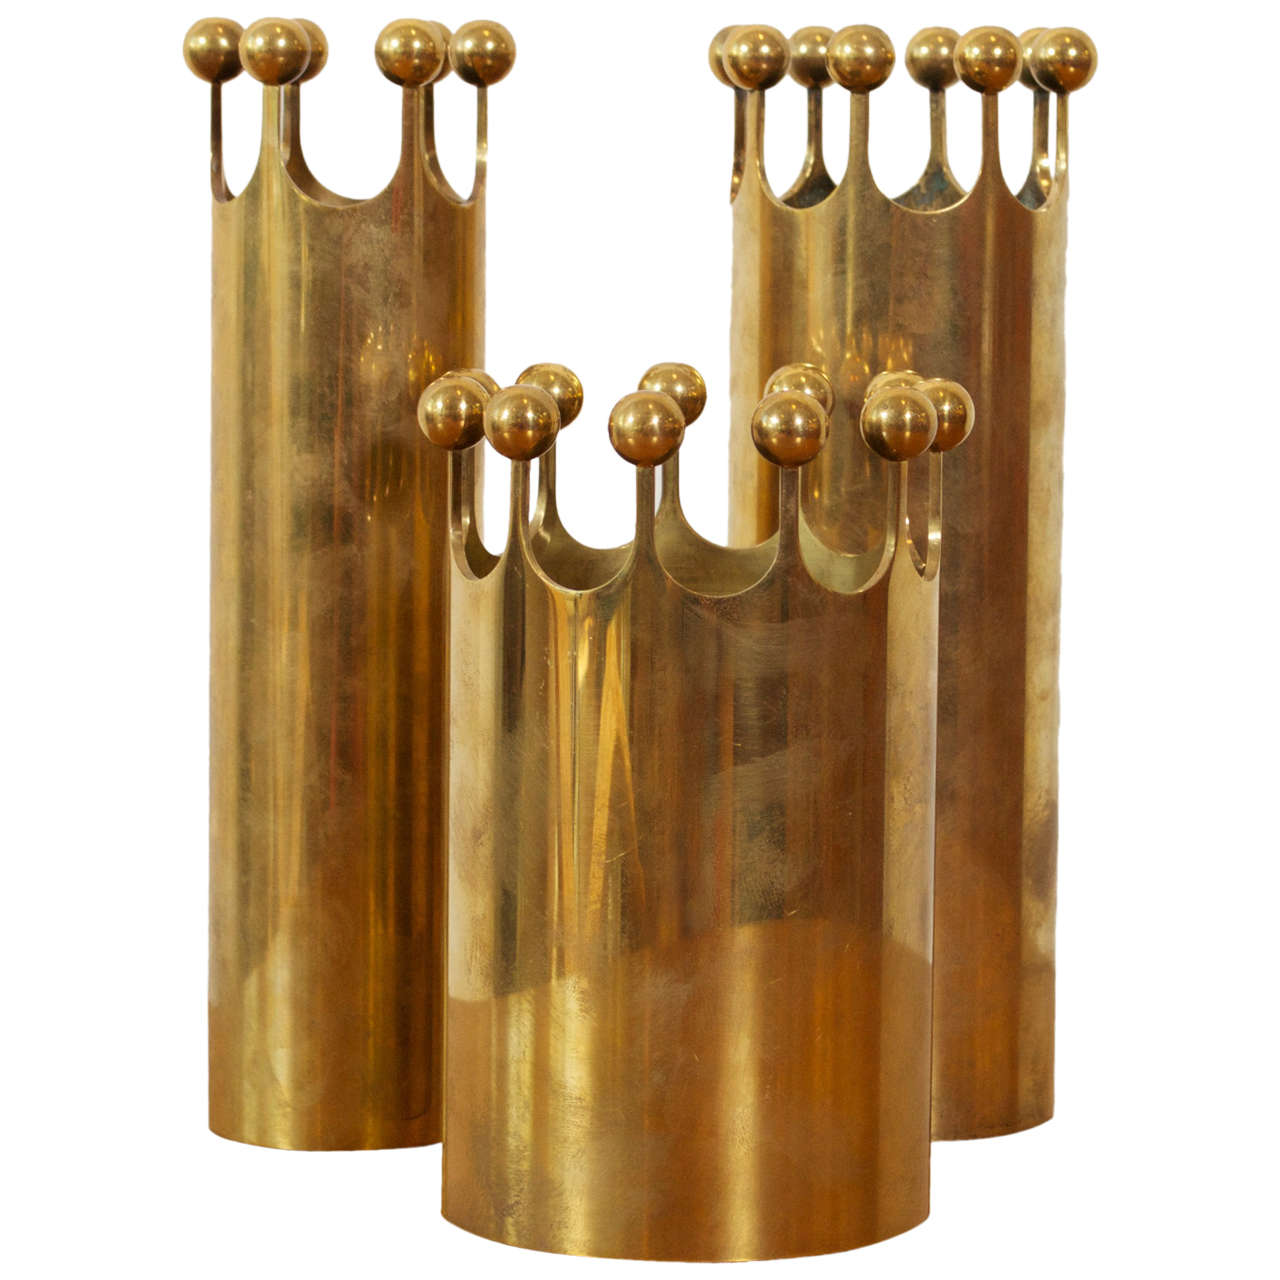 Pierre Forsell for Skultuna - Trio of Vases